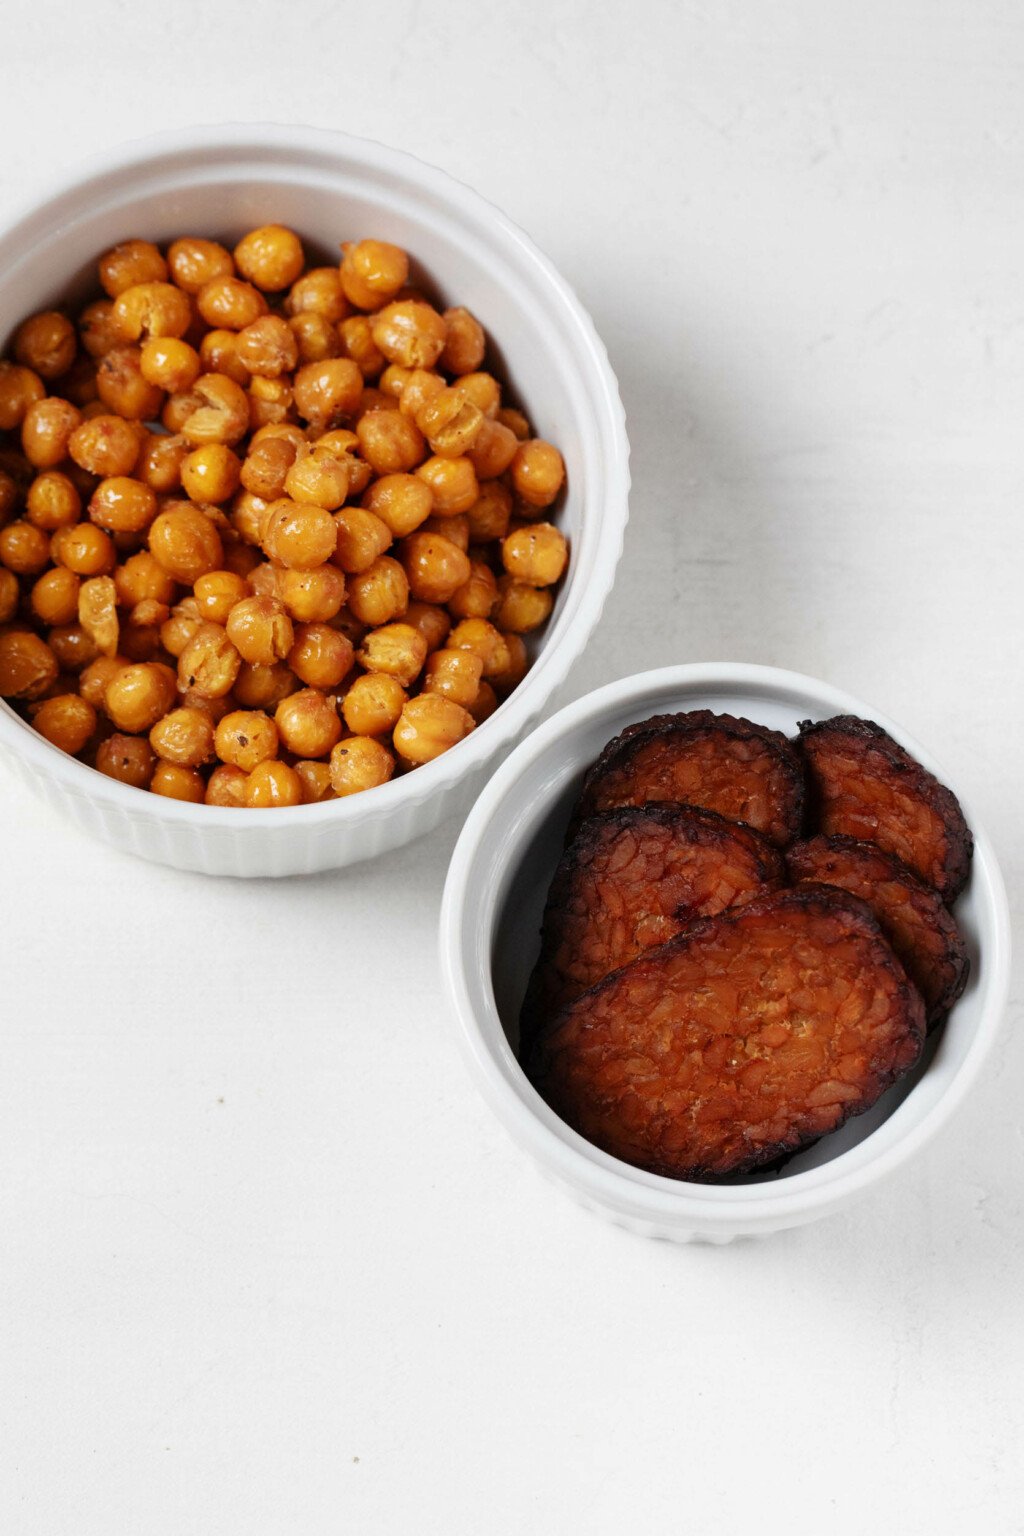 An overhead image of two small, white bowls. One contains crispy roasted chickpeas, while the other contains darkened, crispy baked tempeh bacon.